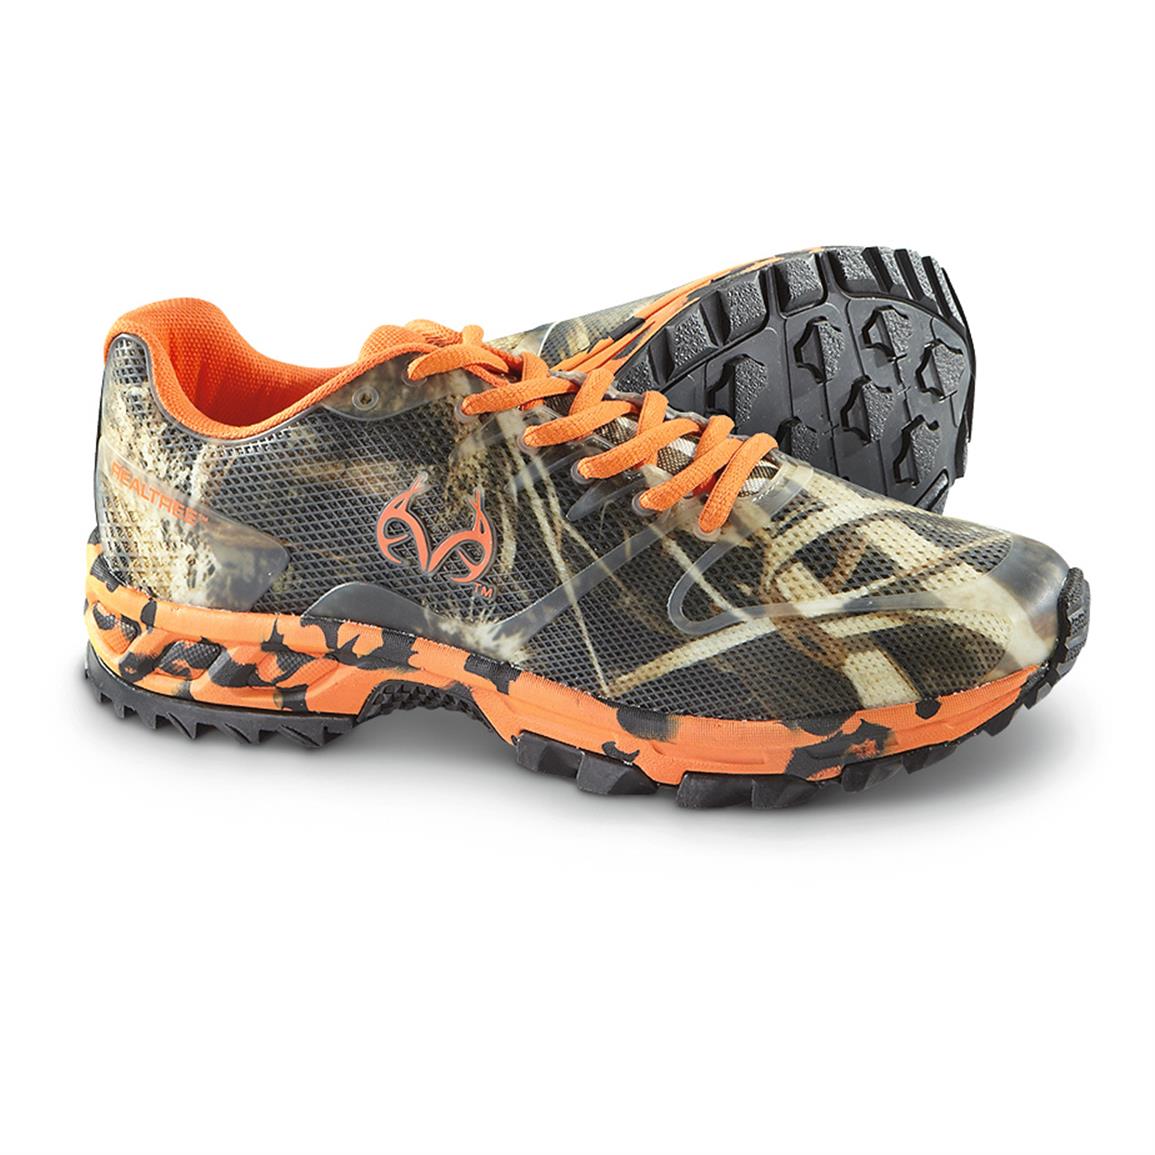 Realtree Girl Tennis Shoes